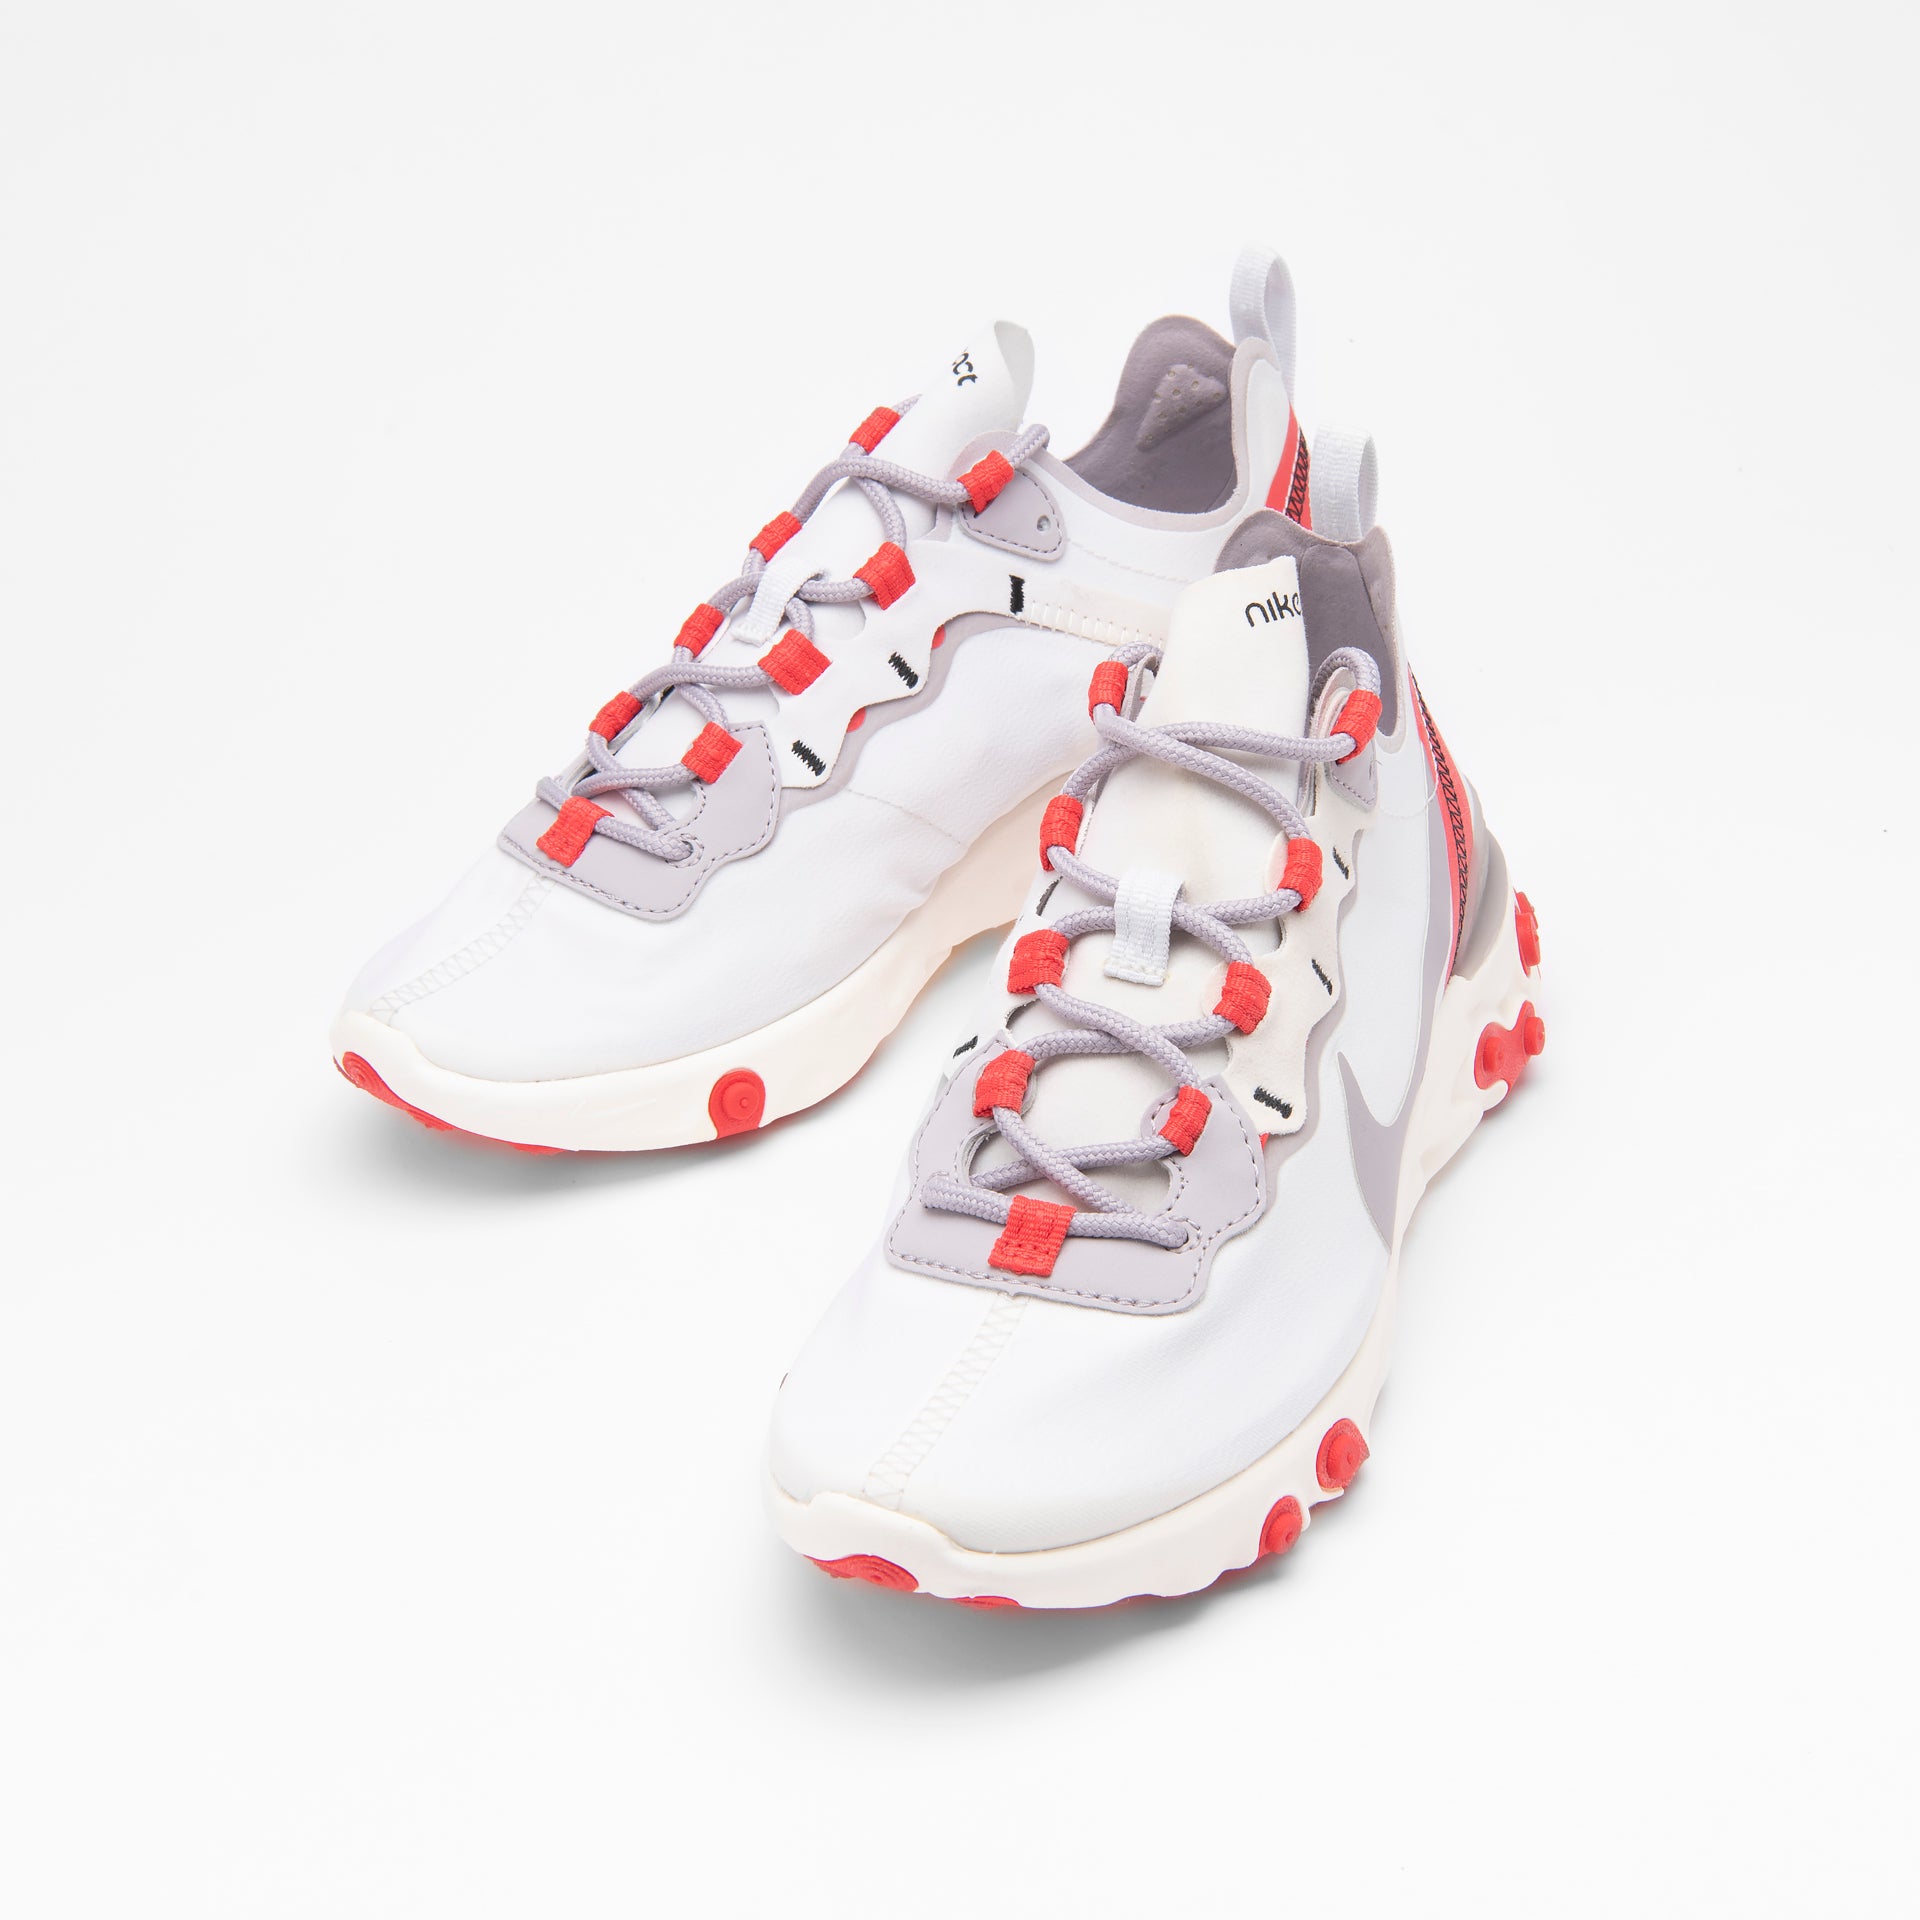 React Element 55 Sneakers From Nike